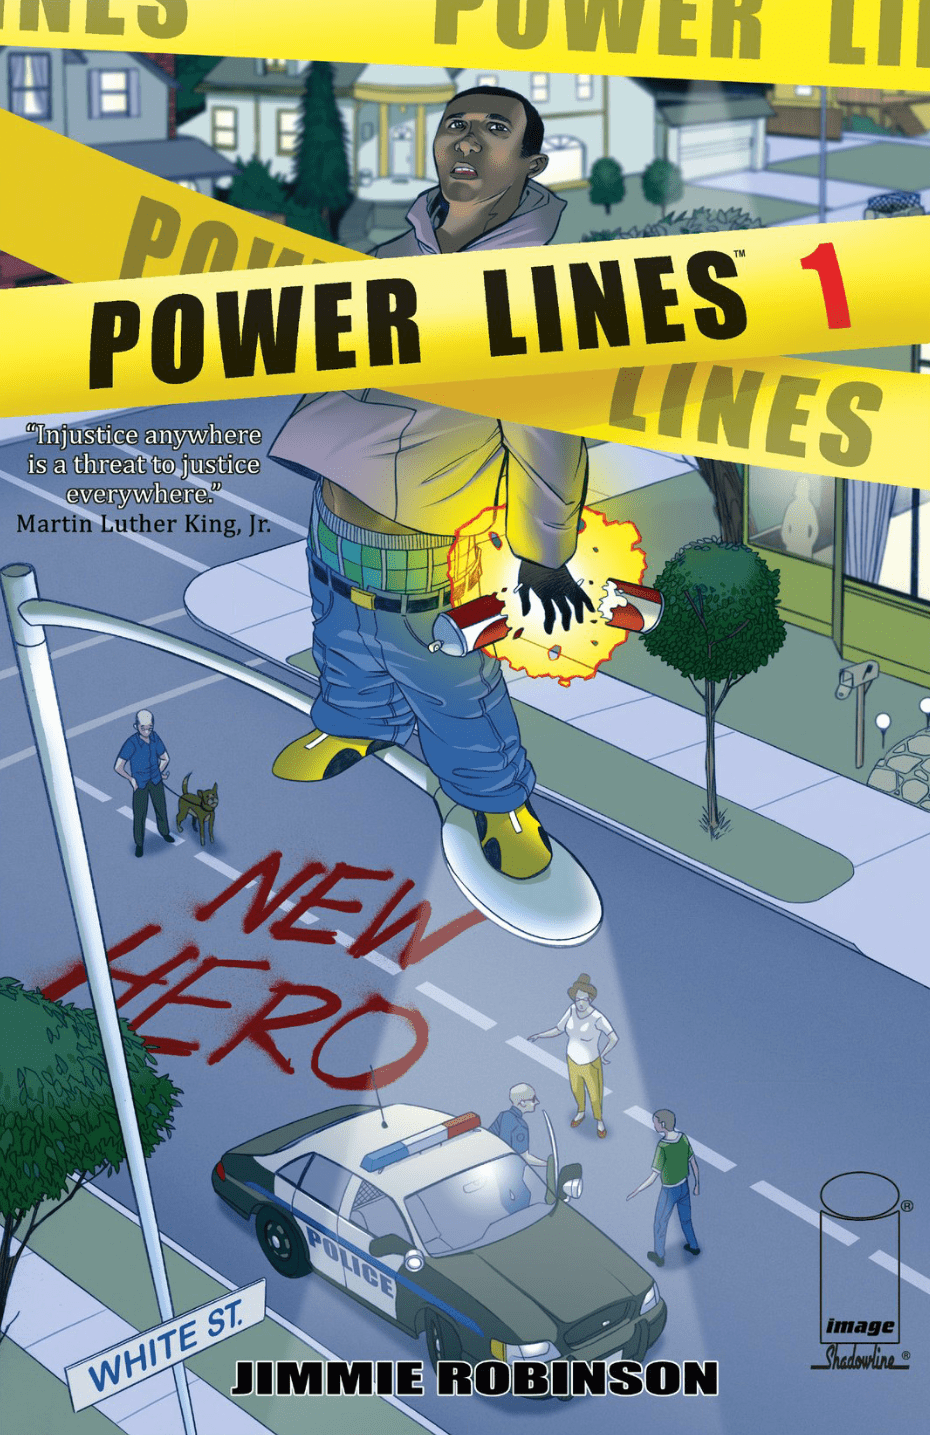 Out This Week, A Comic Book Where A Black Street Dude And A White Racist Get Superpowers